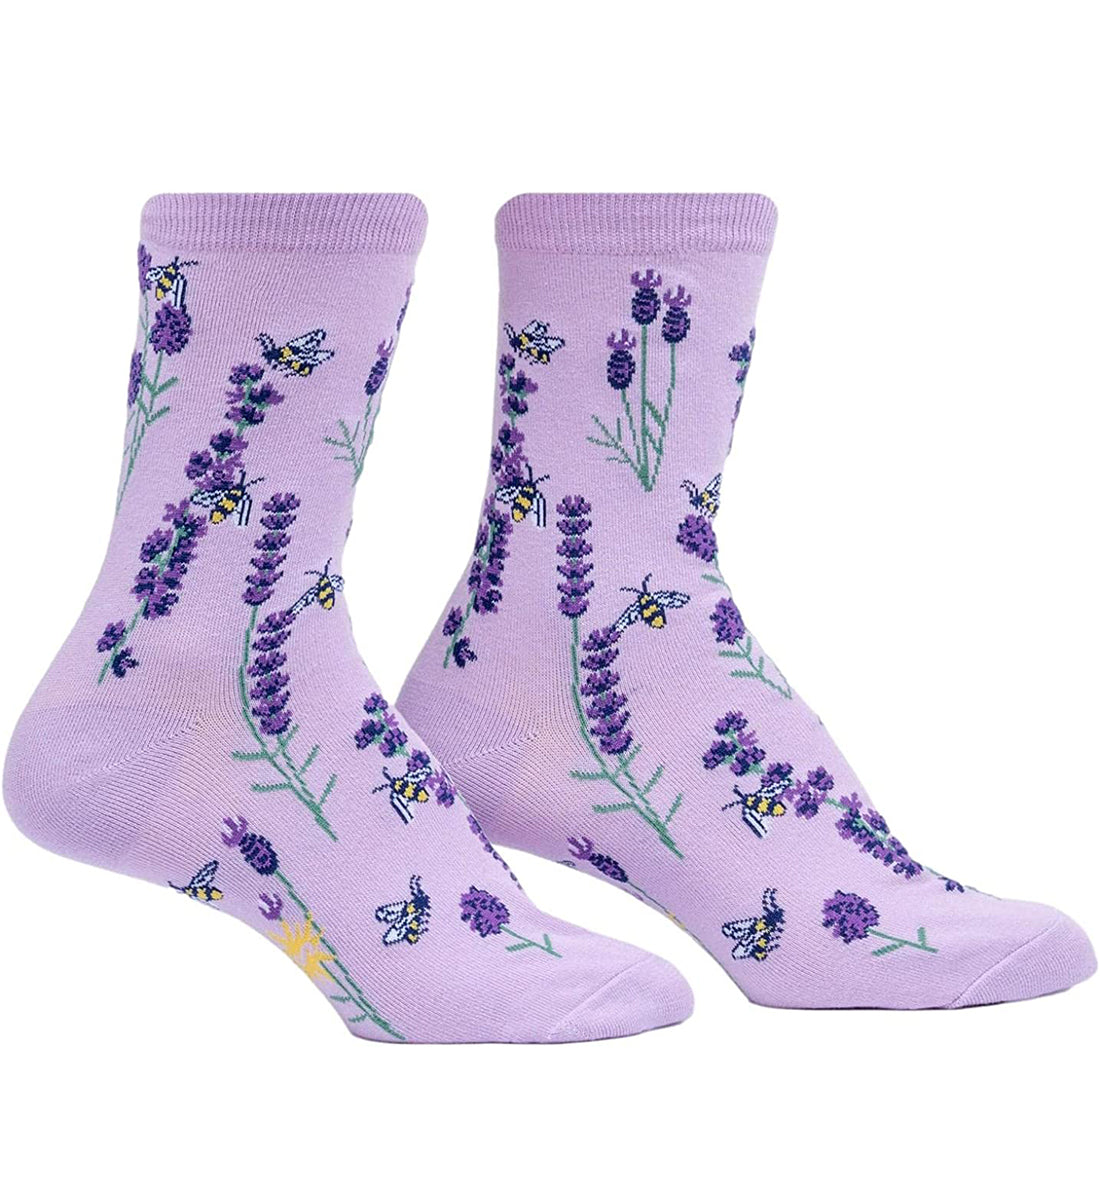 SOCK it to me Women&#39;s Crew Socks (W0404-1),Bees and Lavender - Bees and Lavender,One Size